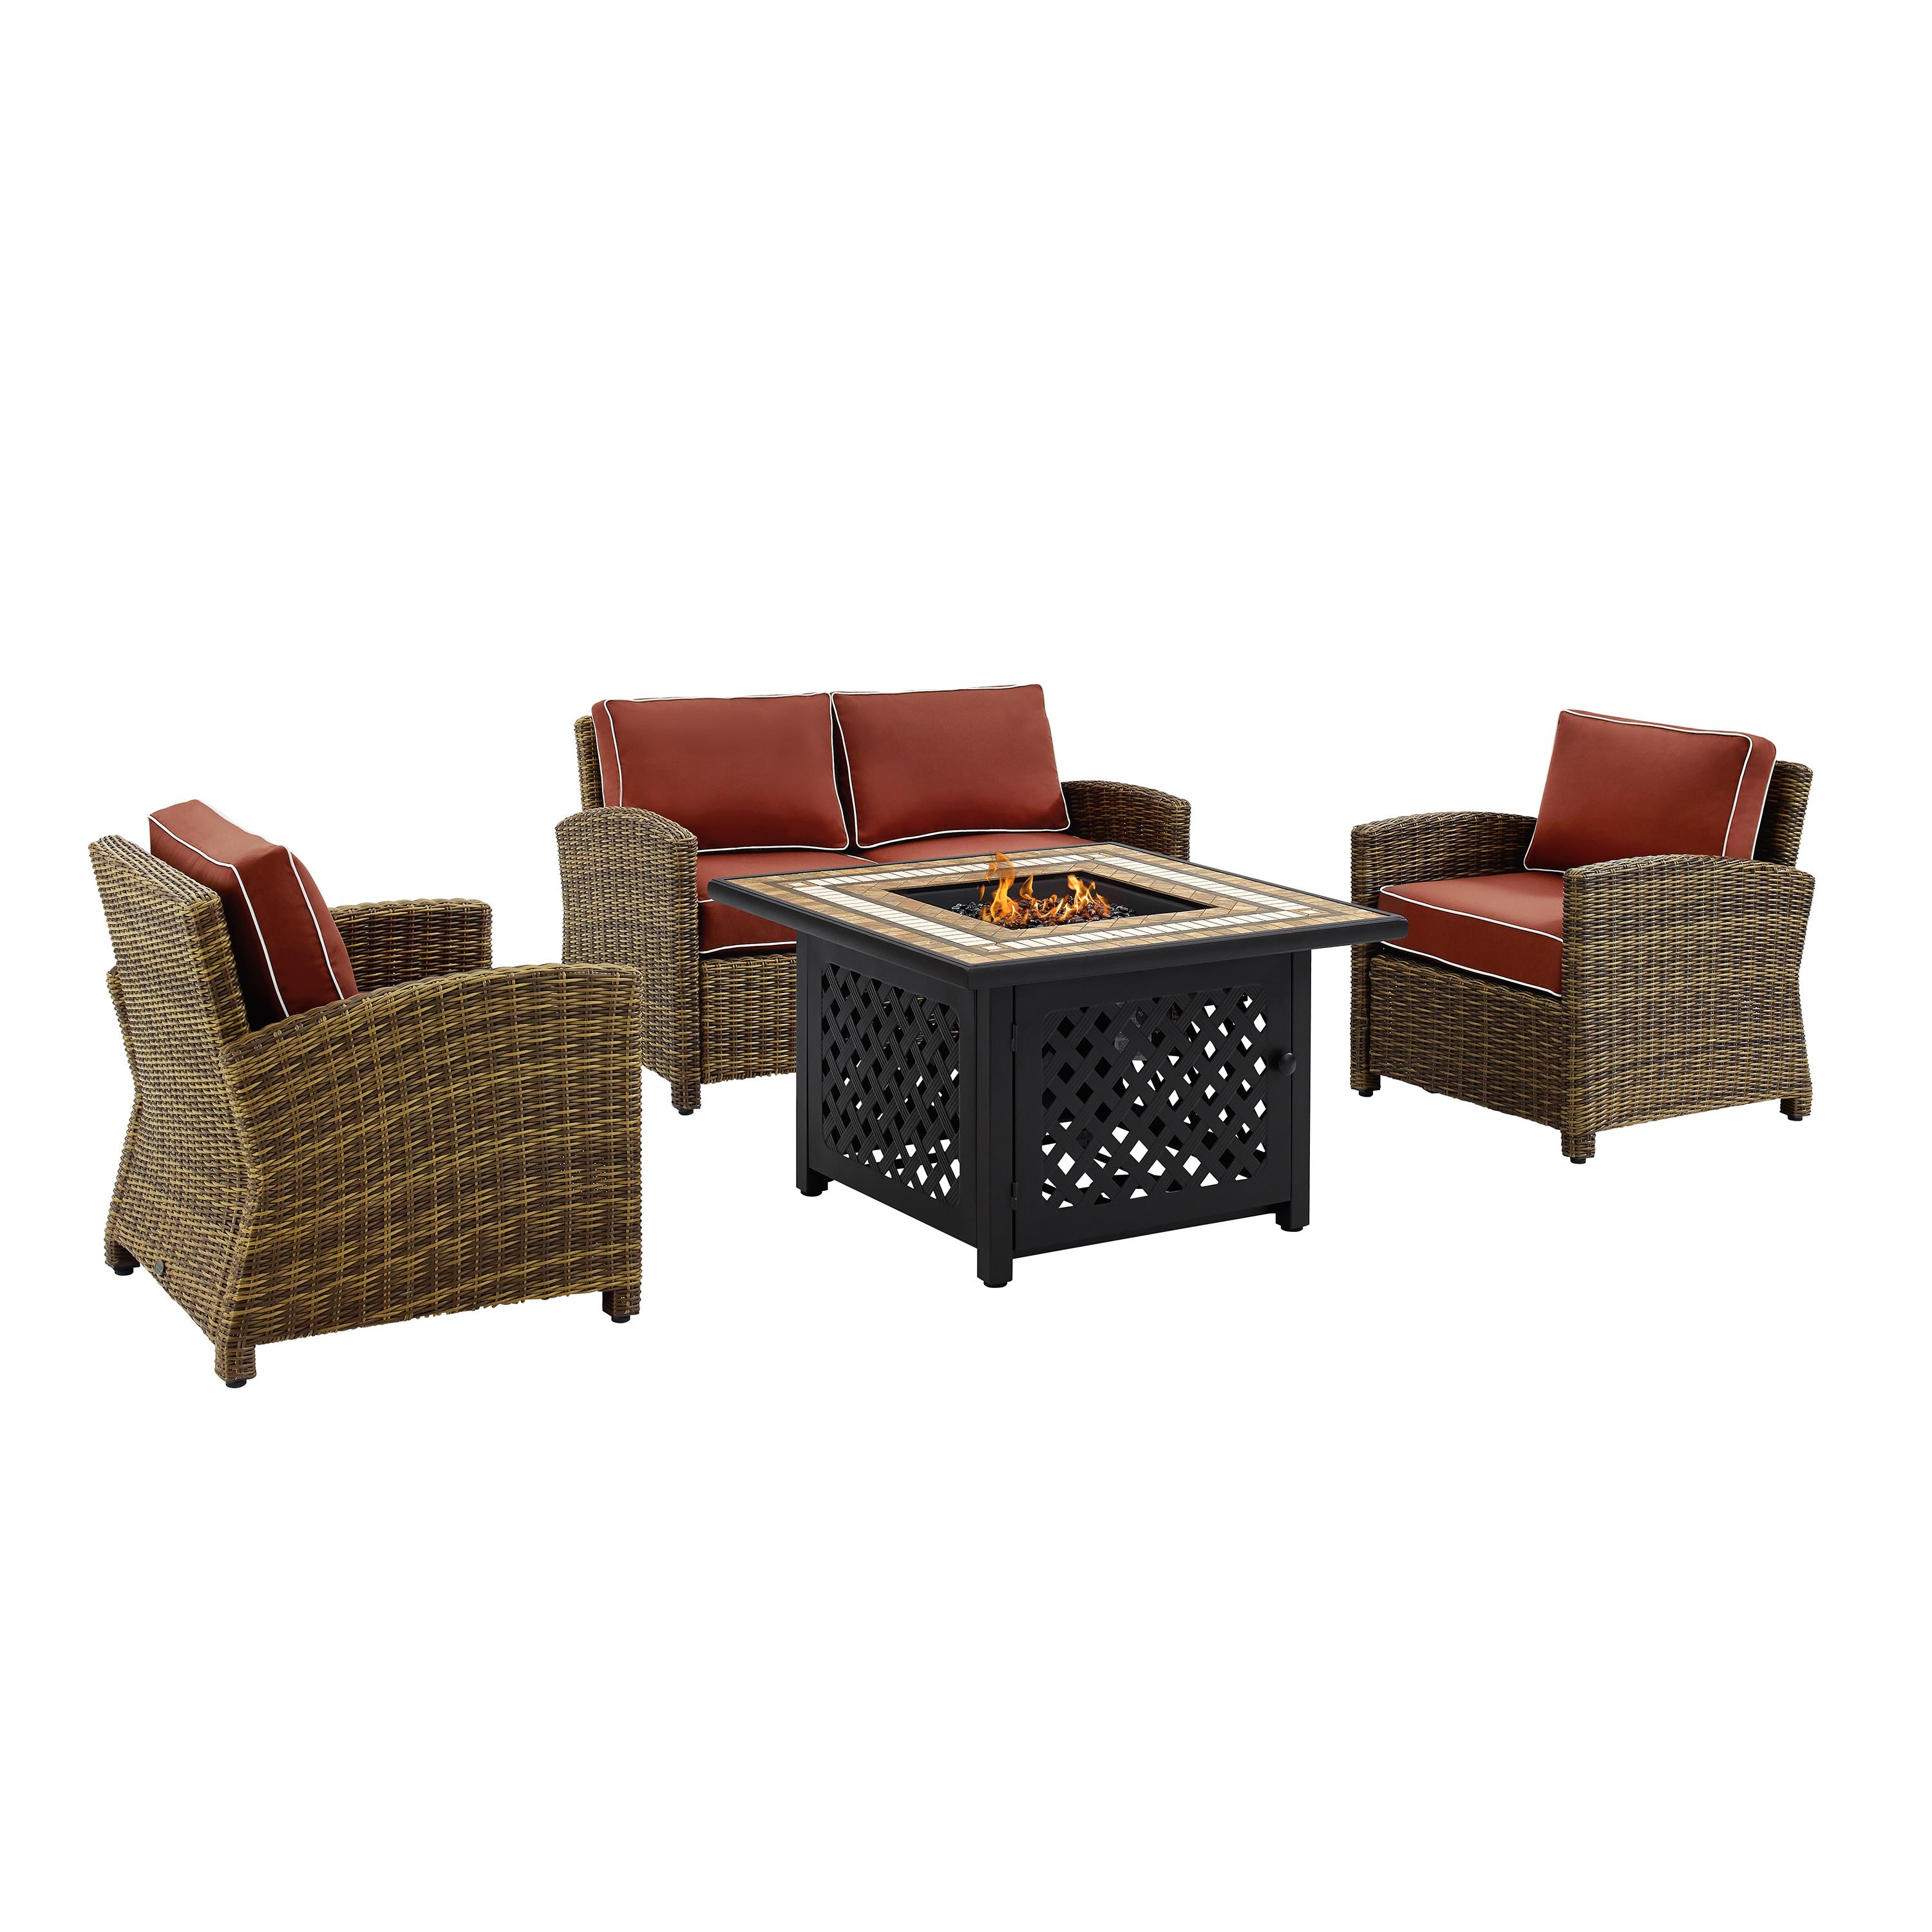 Crosley Furniture Bradenton 4 Piece Patio Fabric Fire Pit Sofa Set in Brown/Red - image 5 of 9